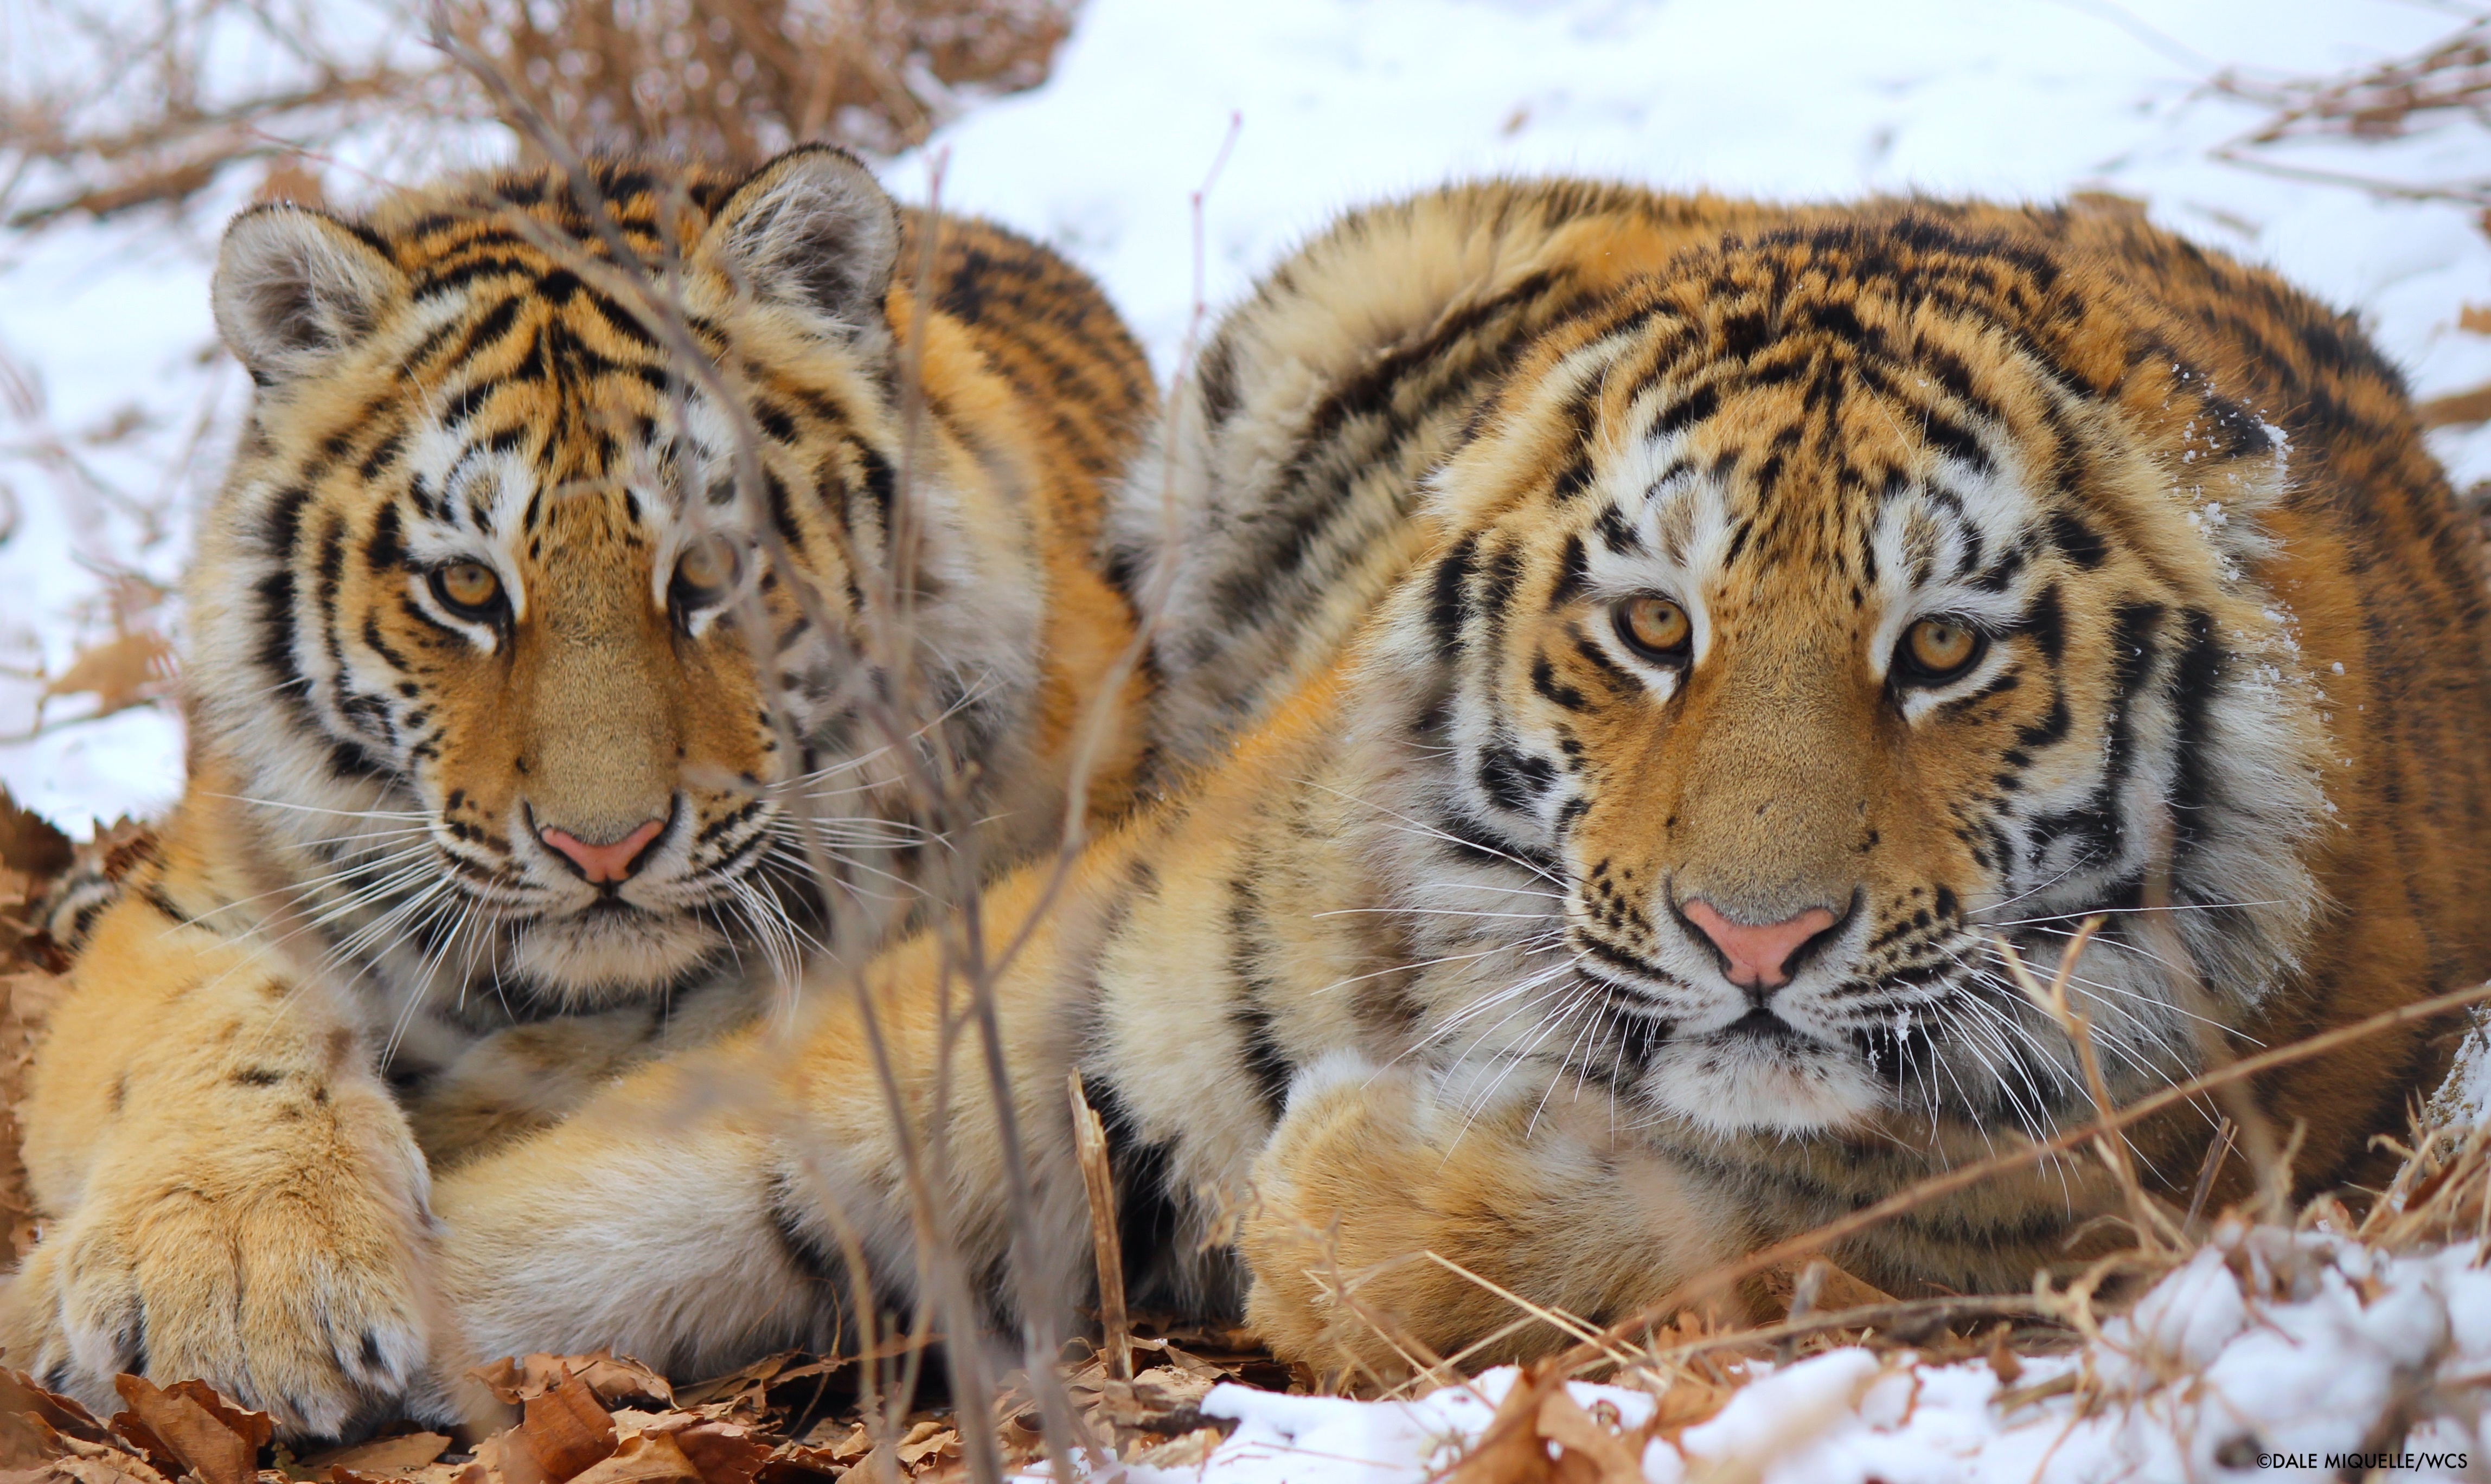 NASA Is Helping Protect Tigers, Jaguars, and Elephants. Here’s How.